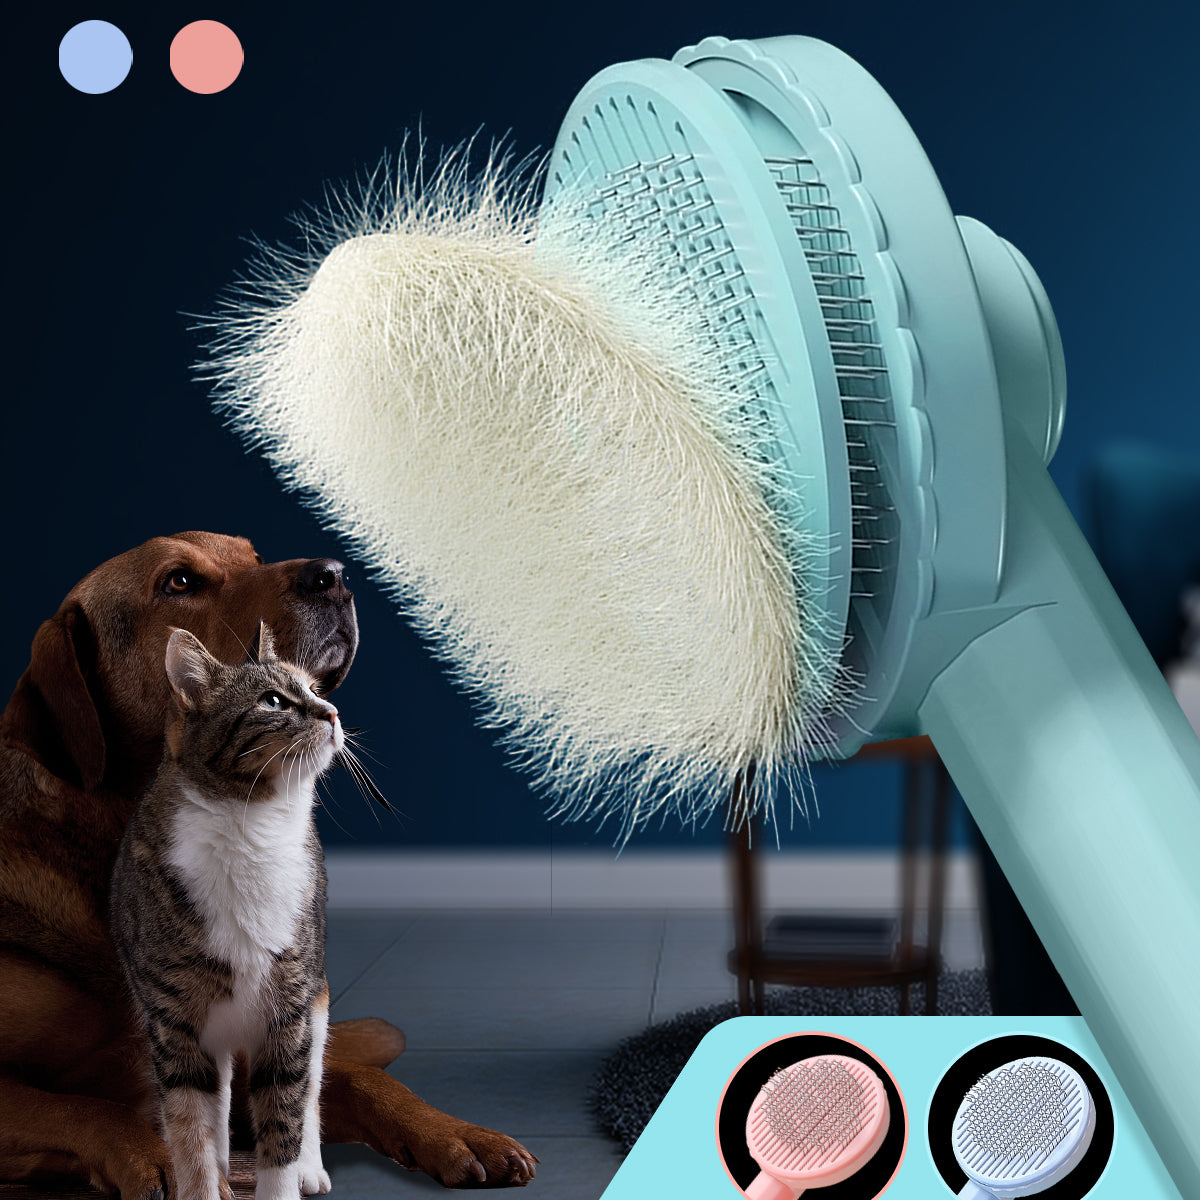 Pet Grooming Brush
 Material: 
 ABS+Stainless steel needle


 Suitable for cats and dogs
 


 Features:
 


 1. High-density pin teeth can penetrate deep into the hair and easily remoPet AccessoriesPoochPlus.shopPoochPlus.shopPet Grooming Brush